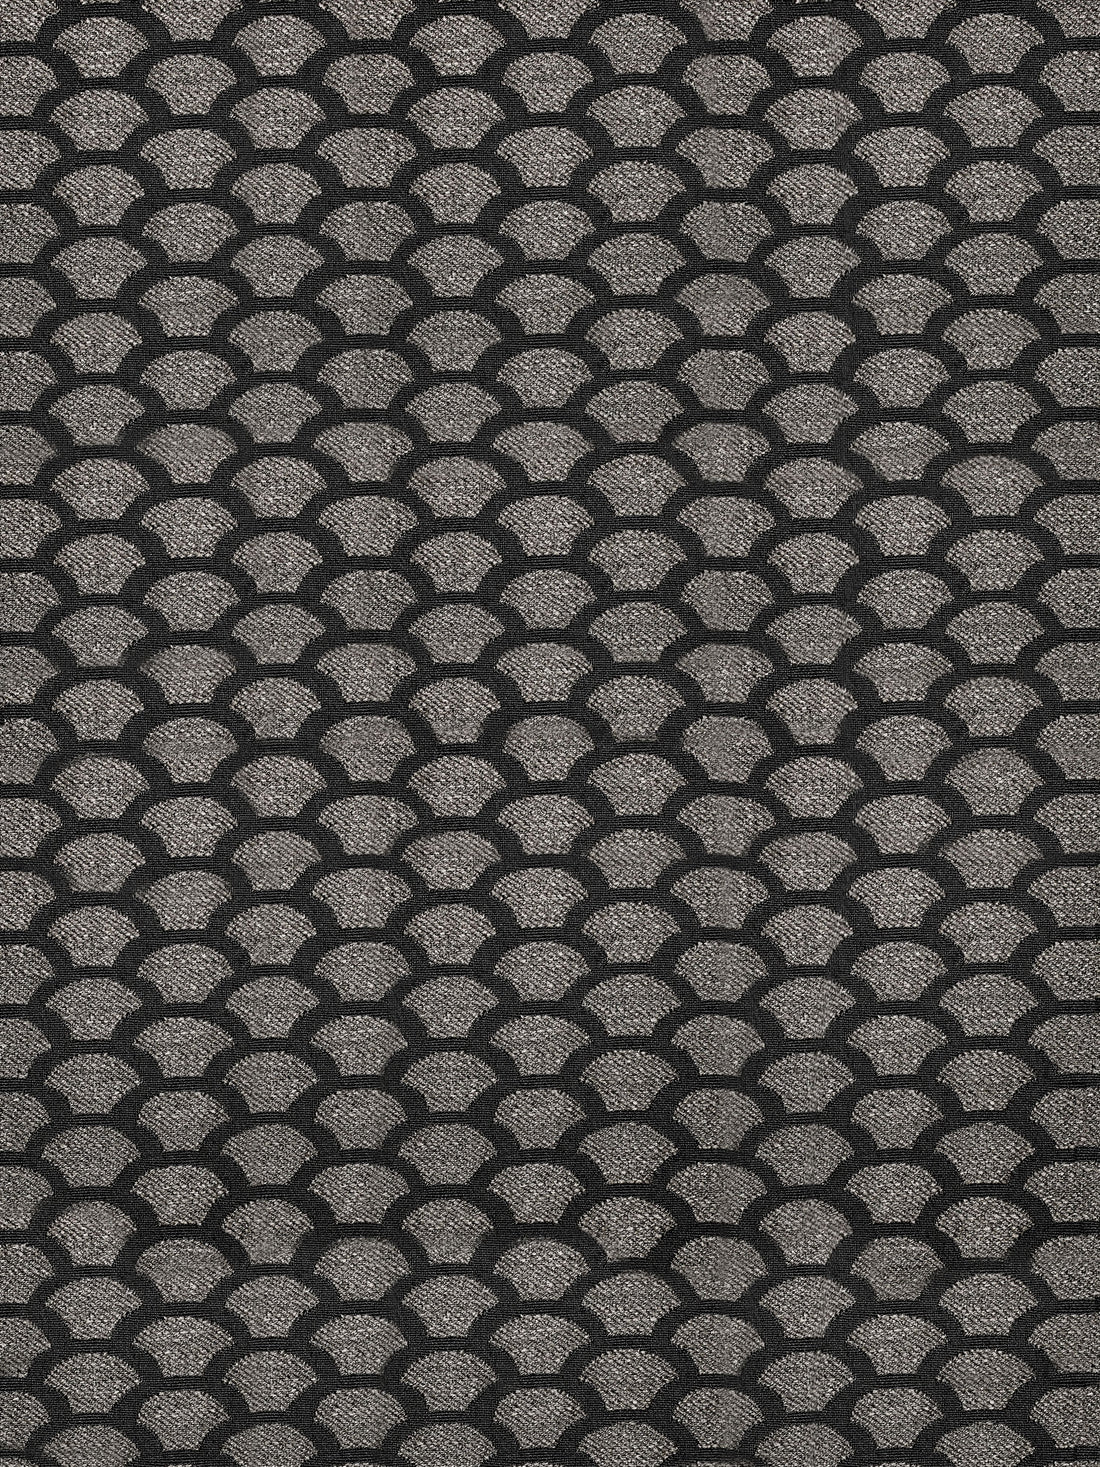 Poseidon fabric in graphite color - pattern number SC 000126972 - by Scalamandre in the Scalamandre Fabrics Book 1 collection